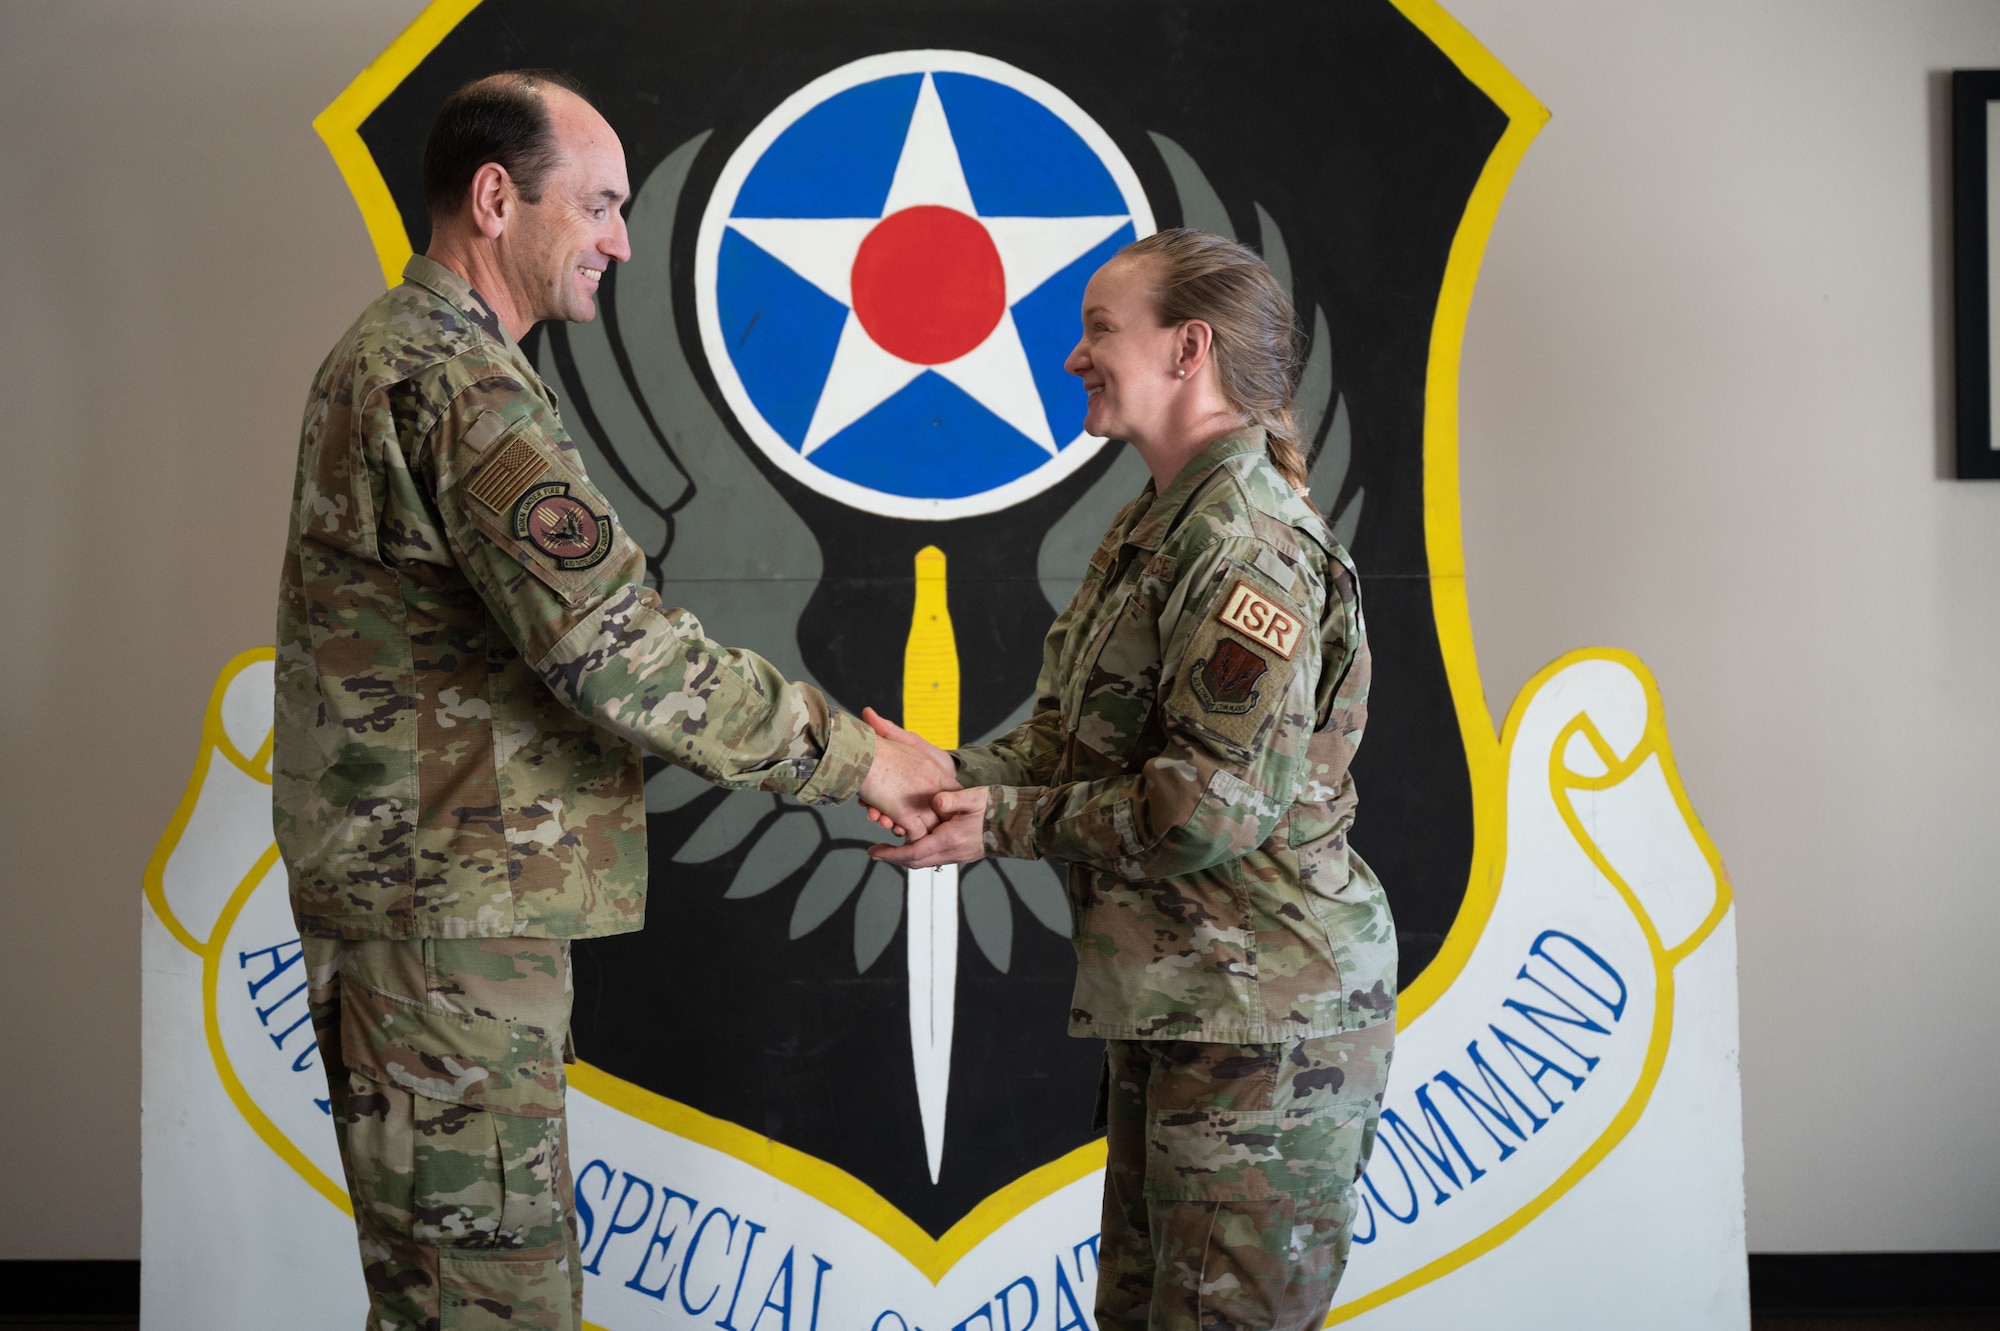 A man and woman in military uniform shake hands in front of a large military logo for Air Force Special Operations Command.